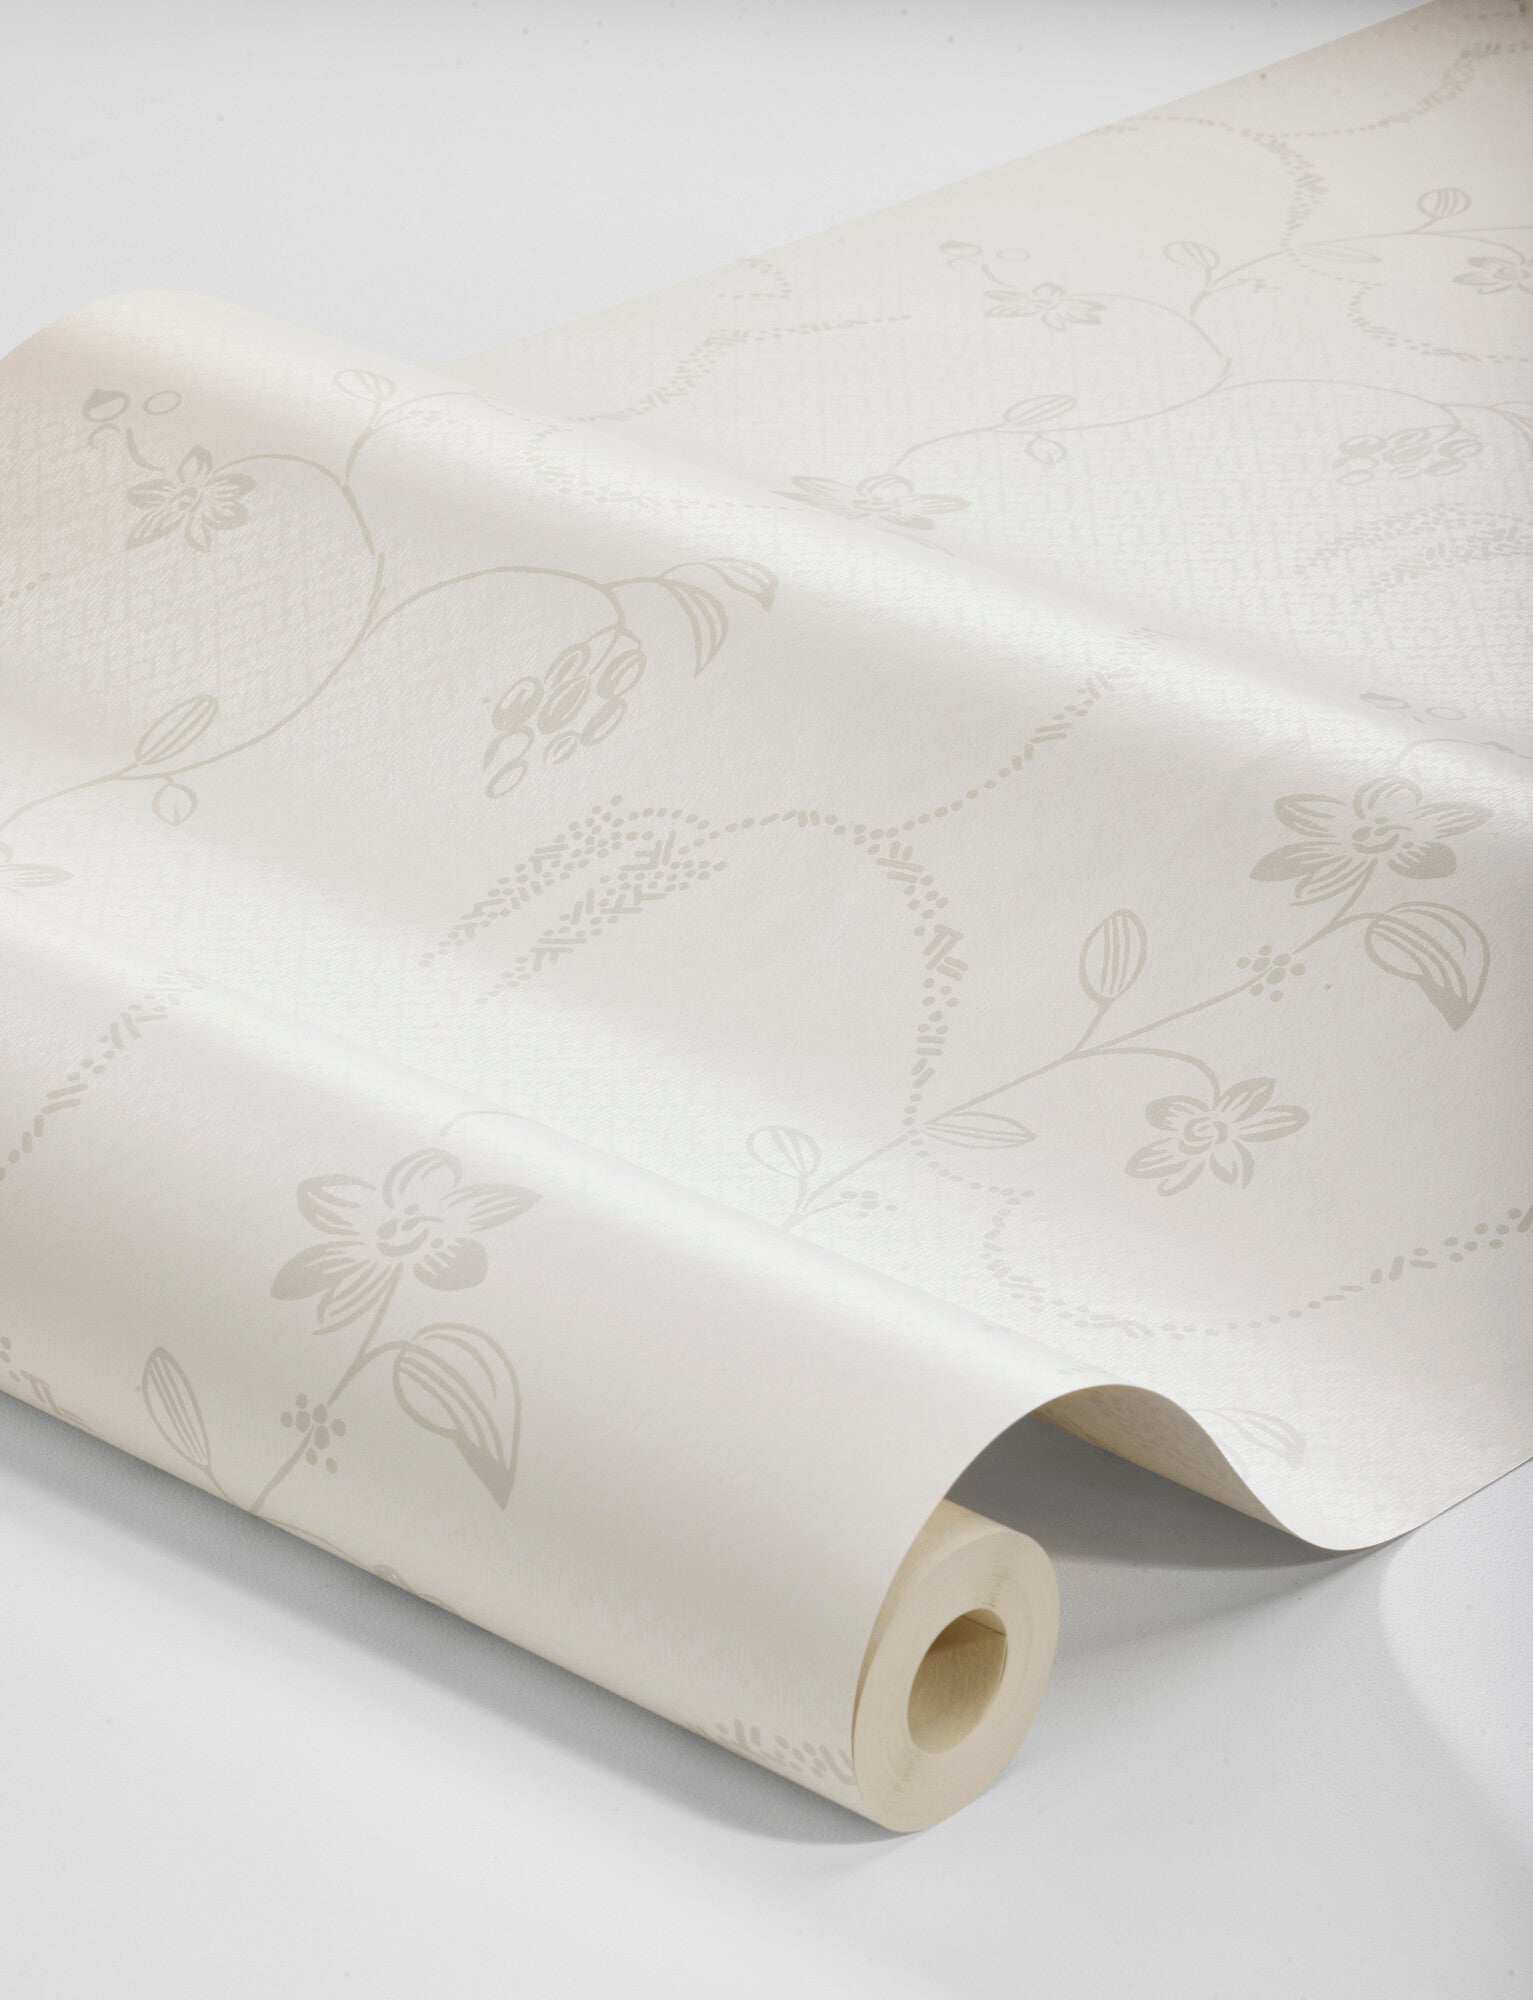 Timelessly elegant, our Elsie wallpaper is colored in bright and fresh tones of gray.